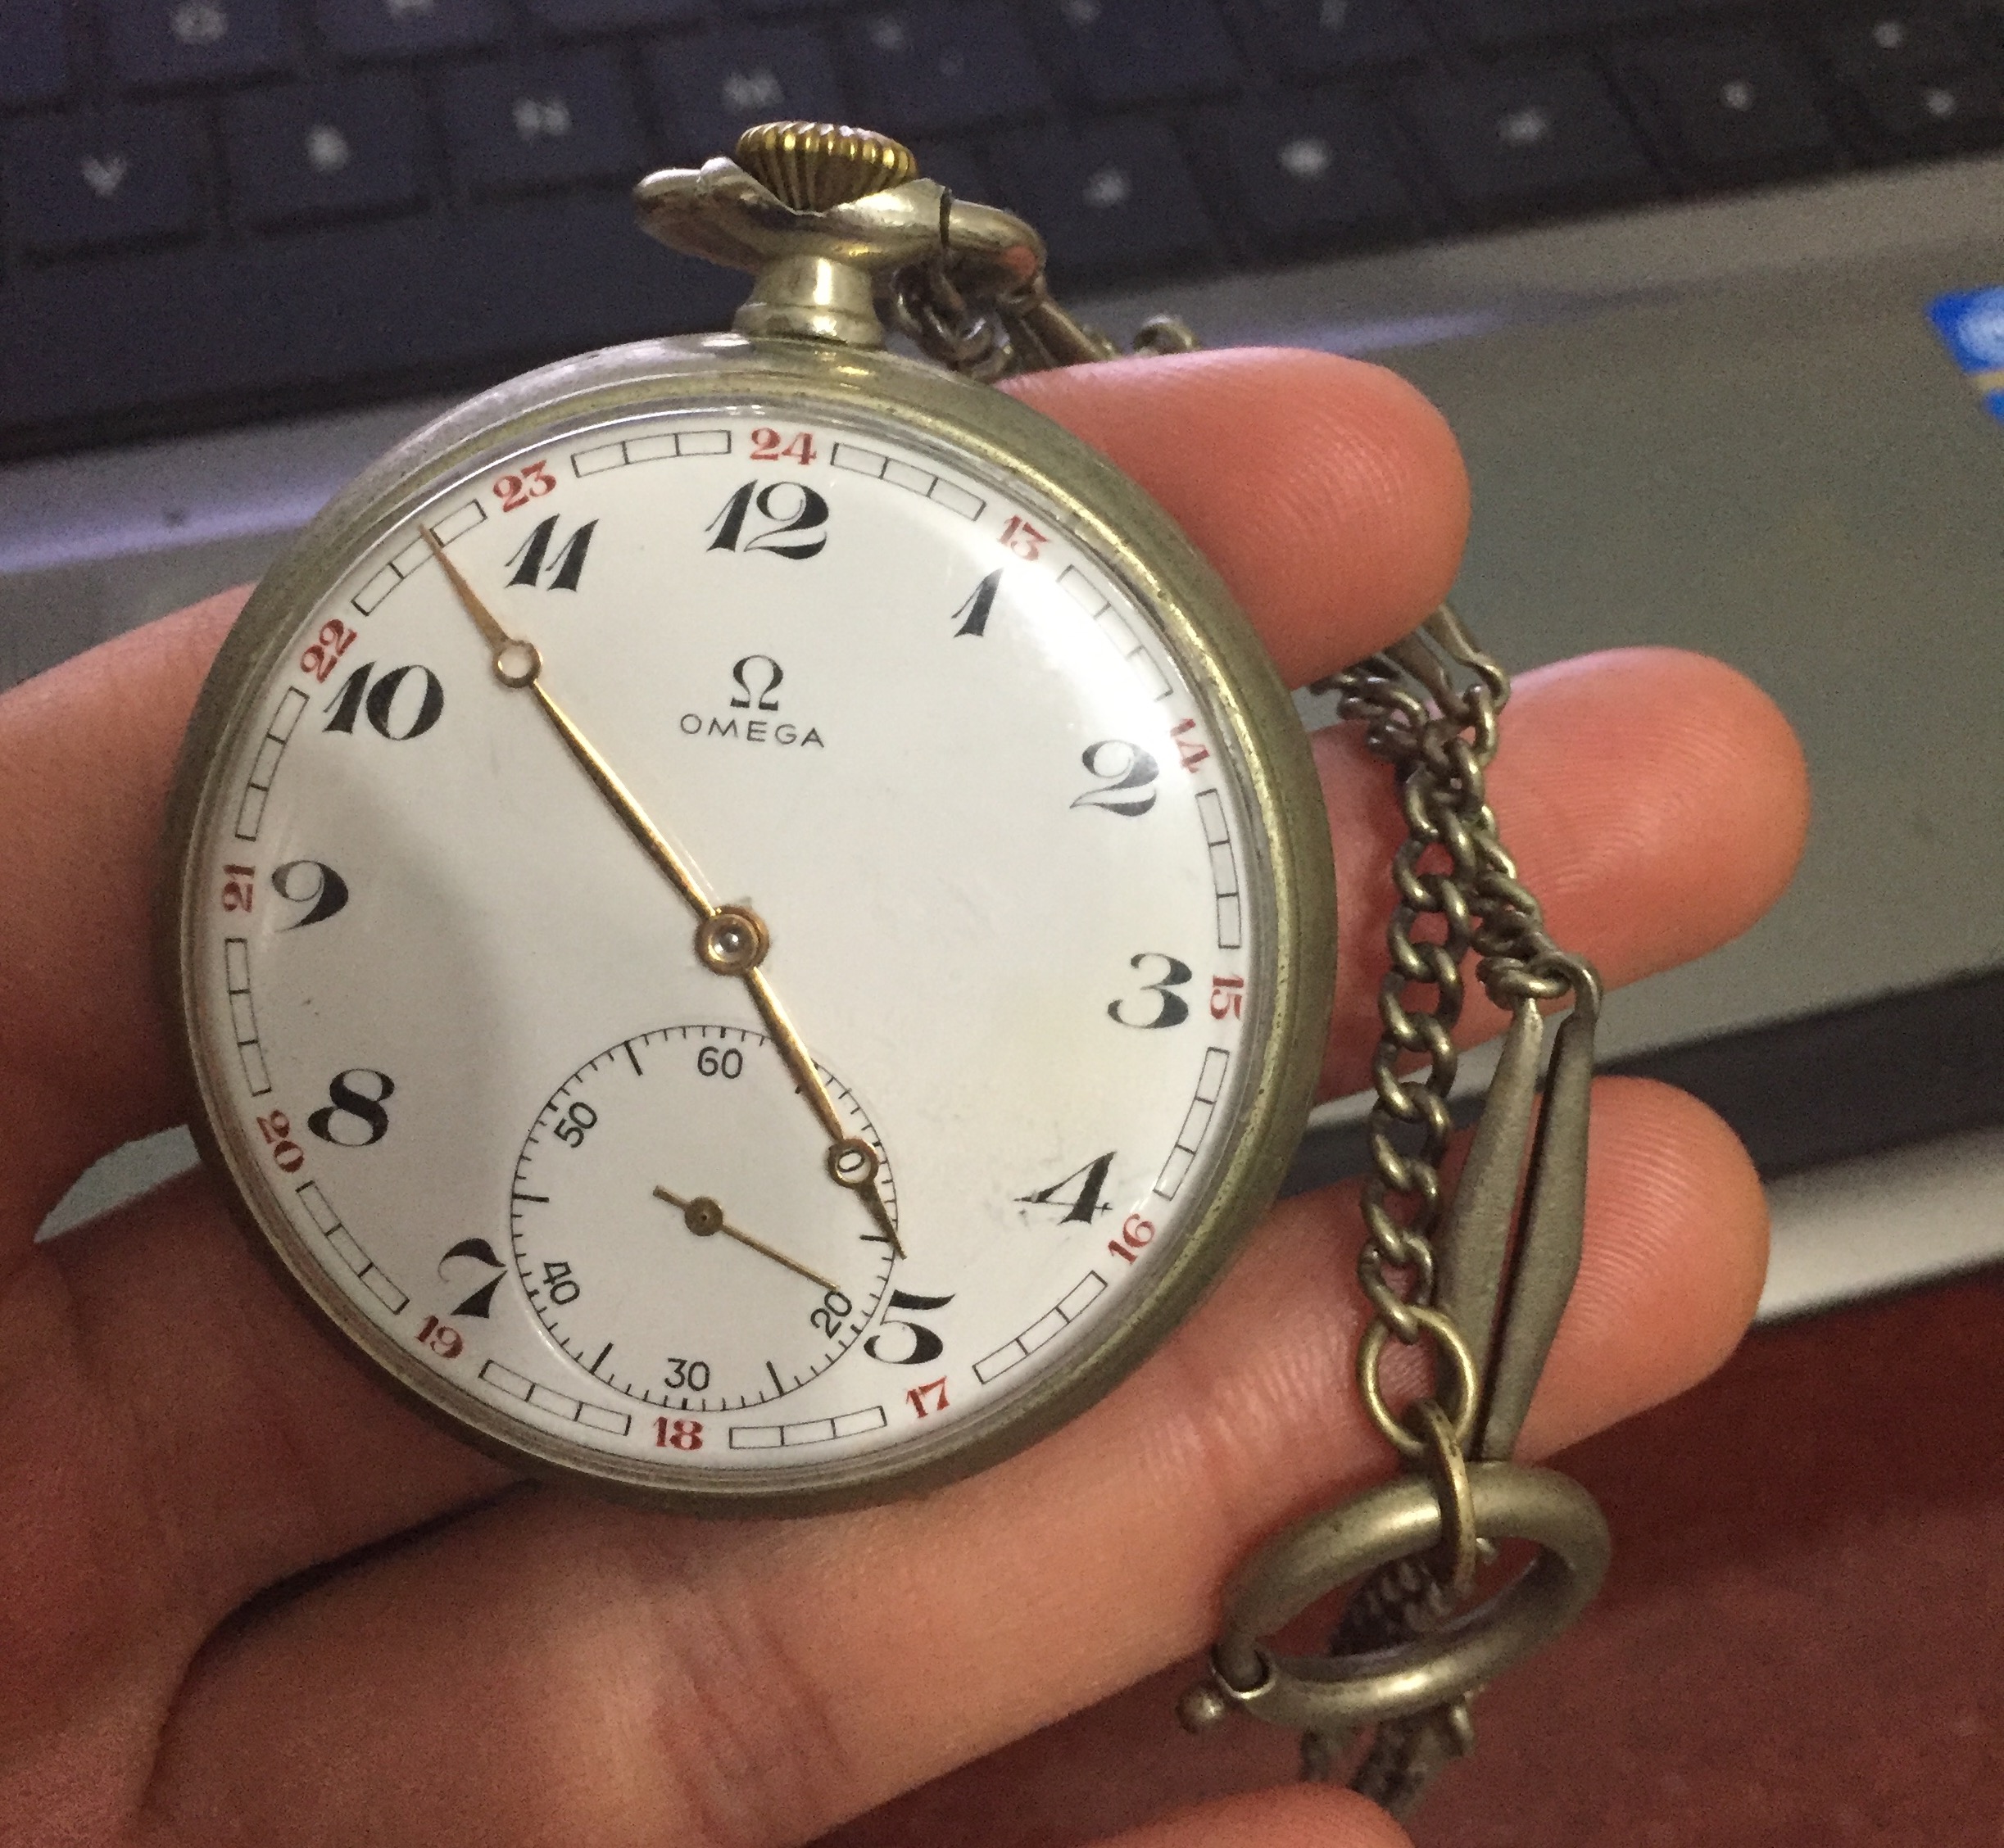 Omega pocket watch serial numbers